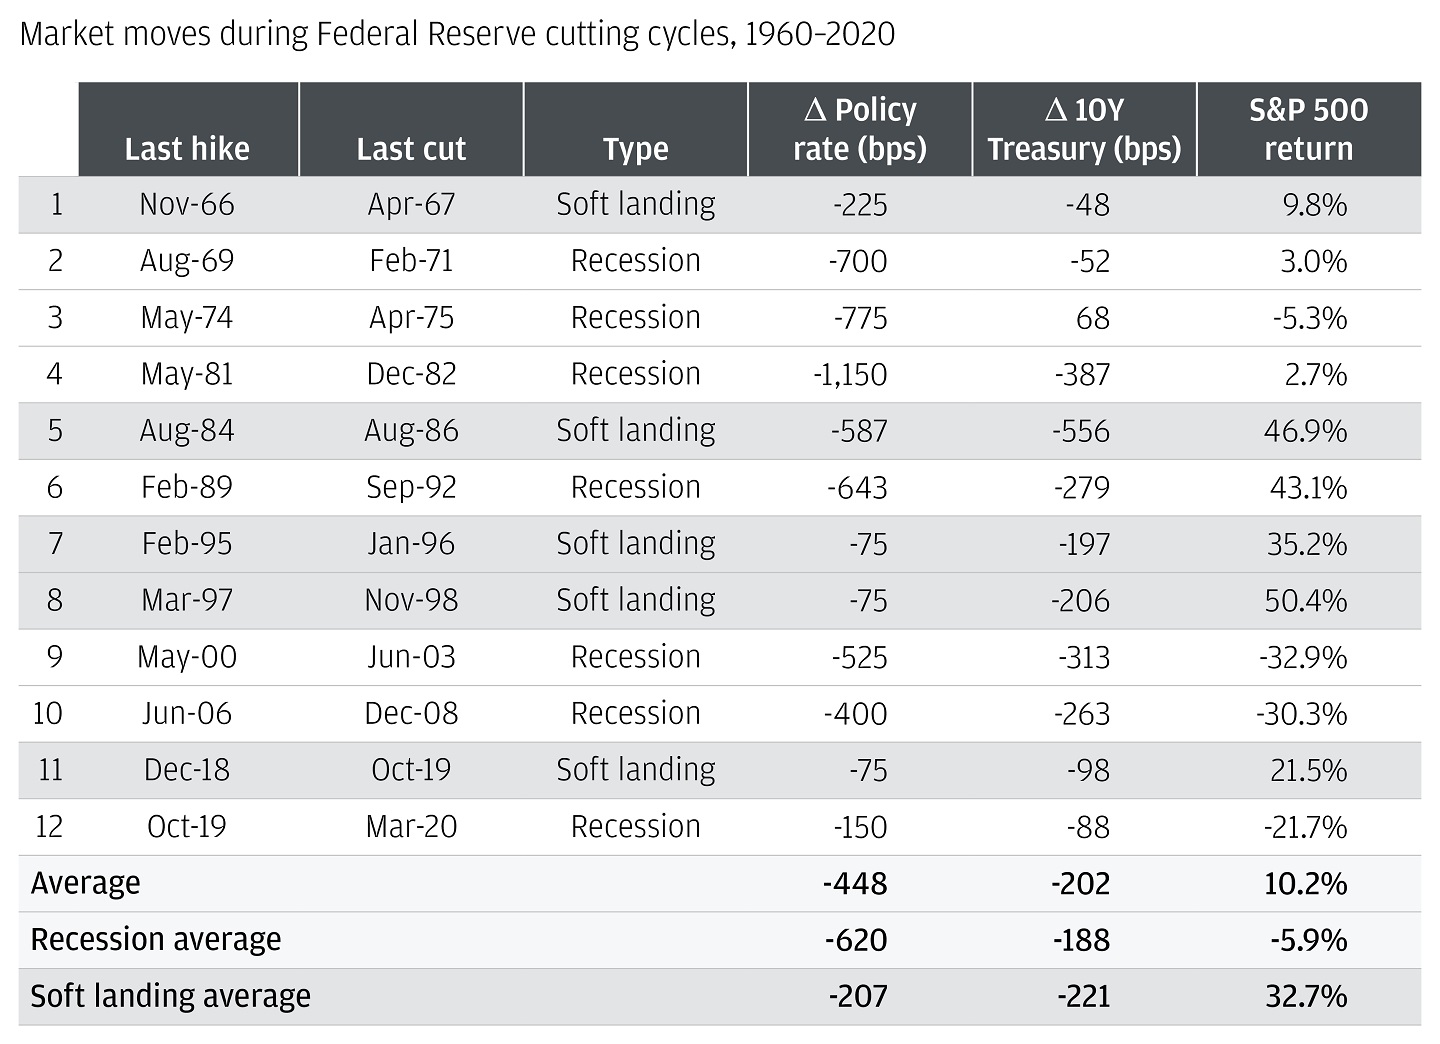 Table showing market moves during Federal Reserve cutting cycles, from 1960 to 2022.